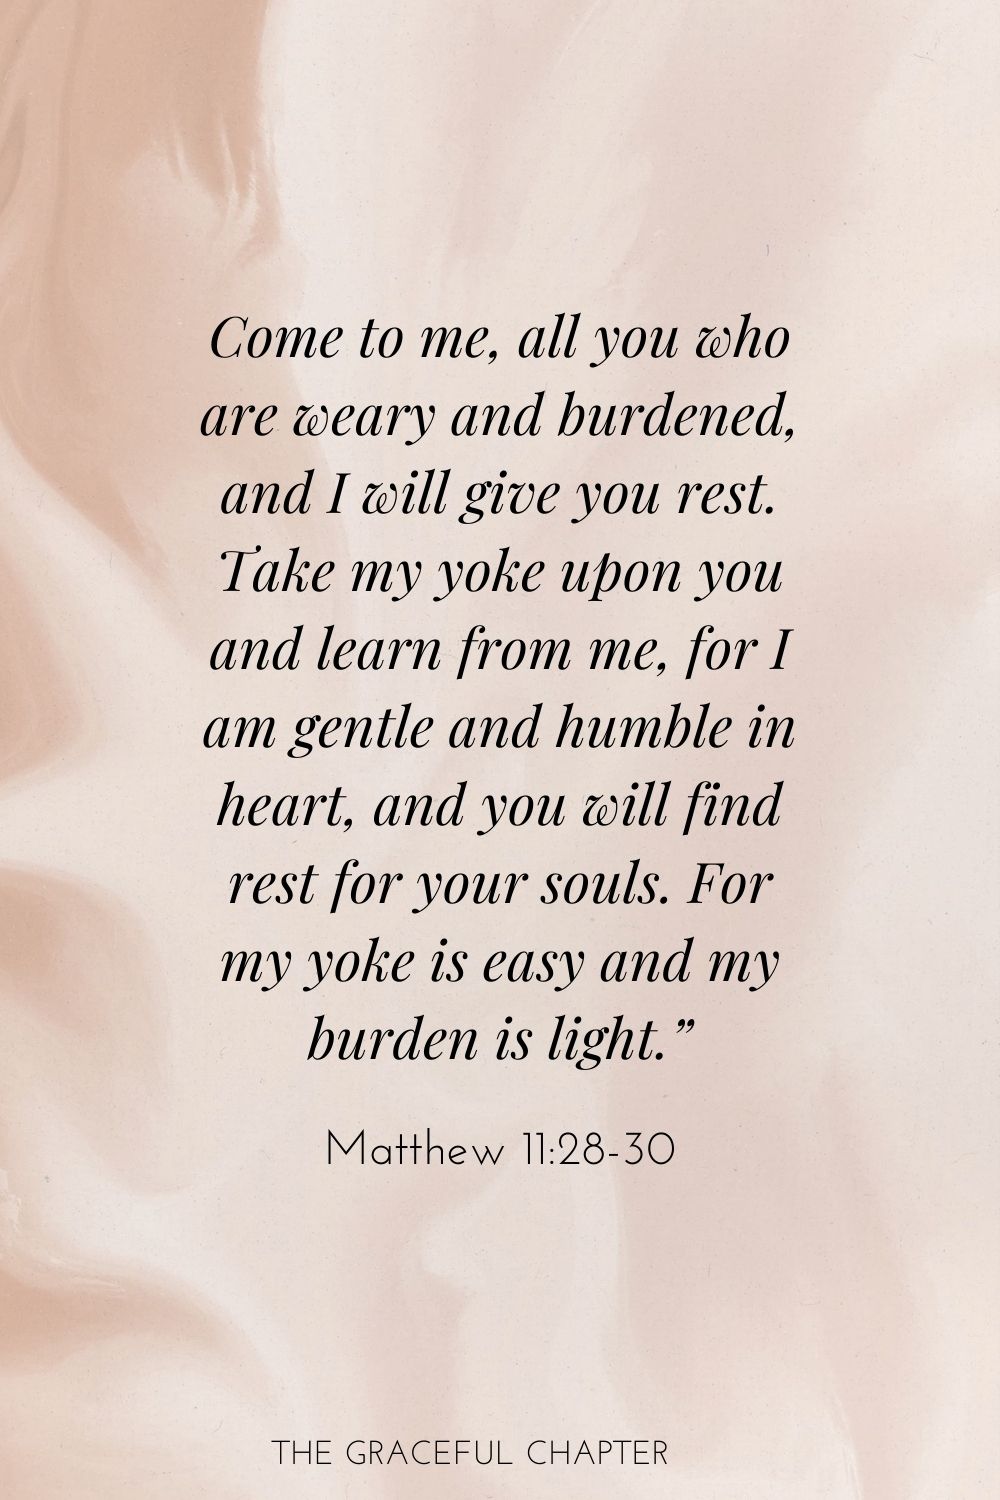 Come to me, all you who are weary and burdened, and I will give you rest. Take my yoke upon you and learn from me, for I am gentle and humble in heart, and you will find rest for your souls. For my yoke is easy and my burden is light.” Matthew 11:28-30